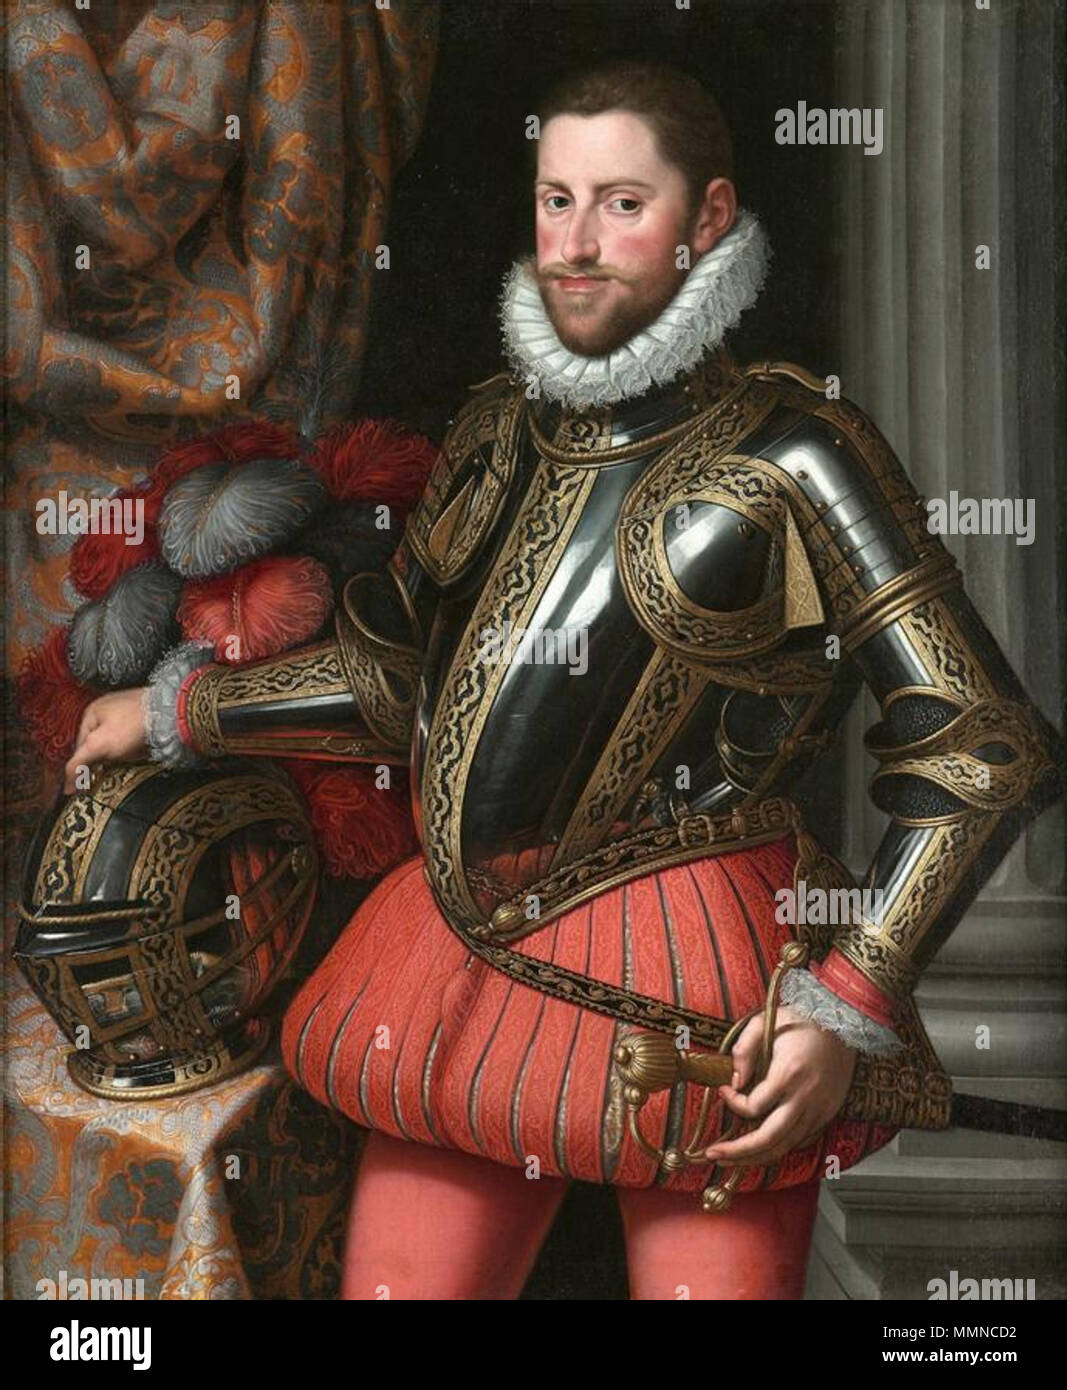 .   Description  This painting, long thought to be a portrait of Rudolf II (1552-1612) by Alonso Sánchez Coello, was identified as a portrait of Rudolf's younger brother Ernst (1553-1595) in the early 1960s (G. Heinz, 'Studien zür Porträtmalerei,' p. 114). It was one of three portraits of the sons of Maximilian II painted by Martino Rota in Vienna around 1580. The portrait of Maximilian III (1558-1618) is now in Vienna (Kunsthistorisches Museum) and the portrait of Rudolf II (1552-1612) is thought to be lost. DaCosta Kaufmann has described Portrait of Archduke Ernst as one of Rota's finest wor Stock Photo